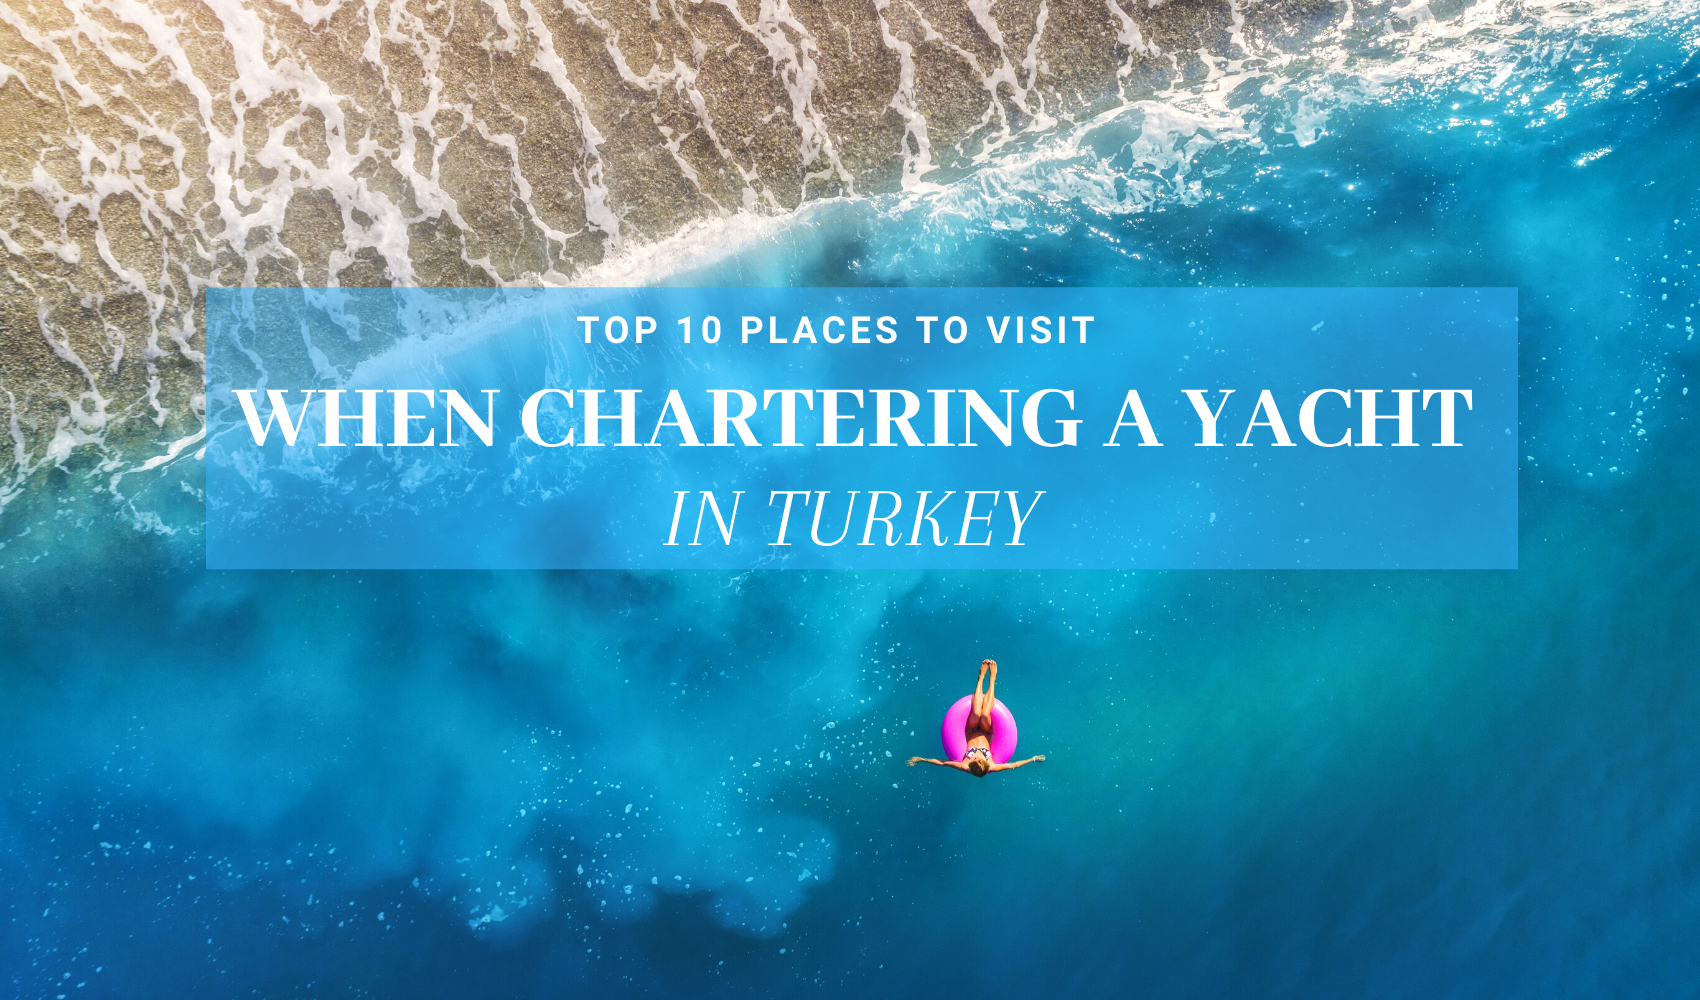 gulet-top-10-places-to-visit-when-chartering-a-yacht-in-turkey-001